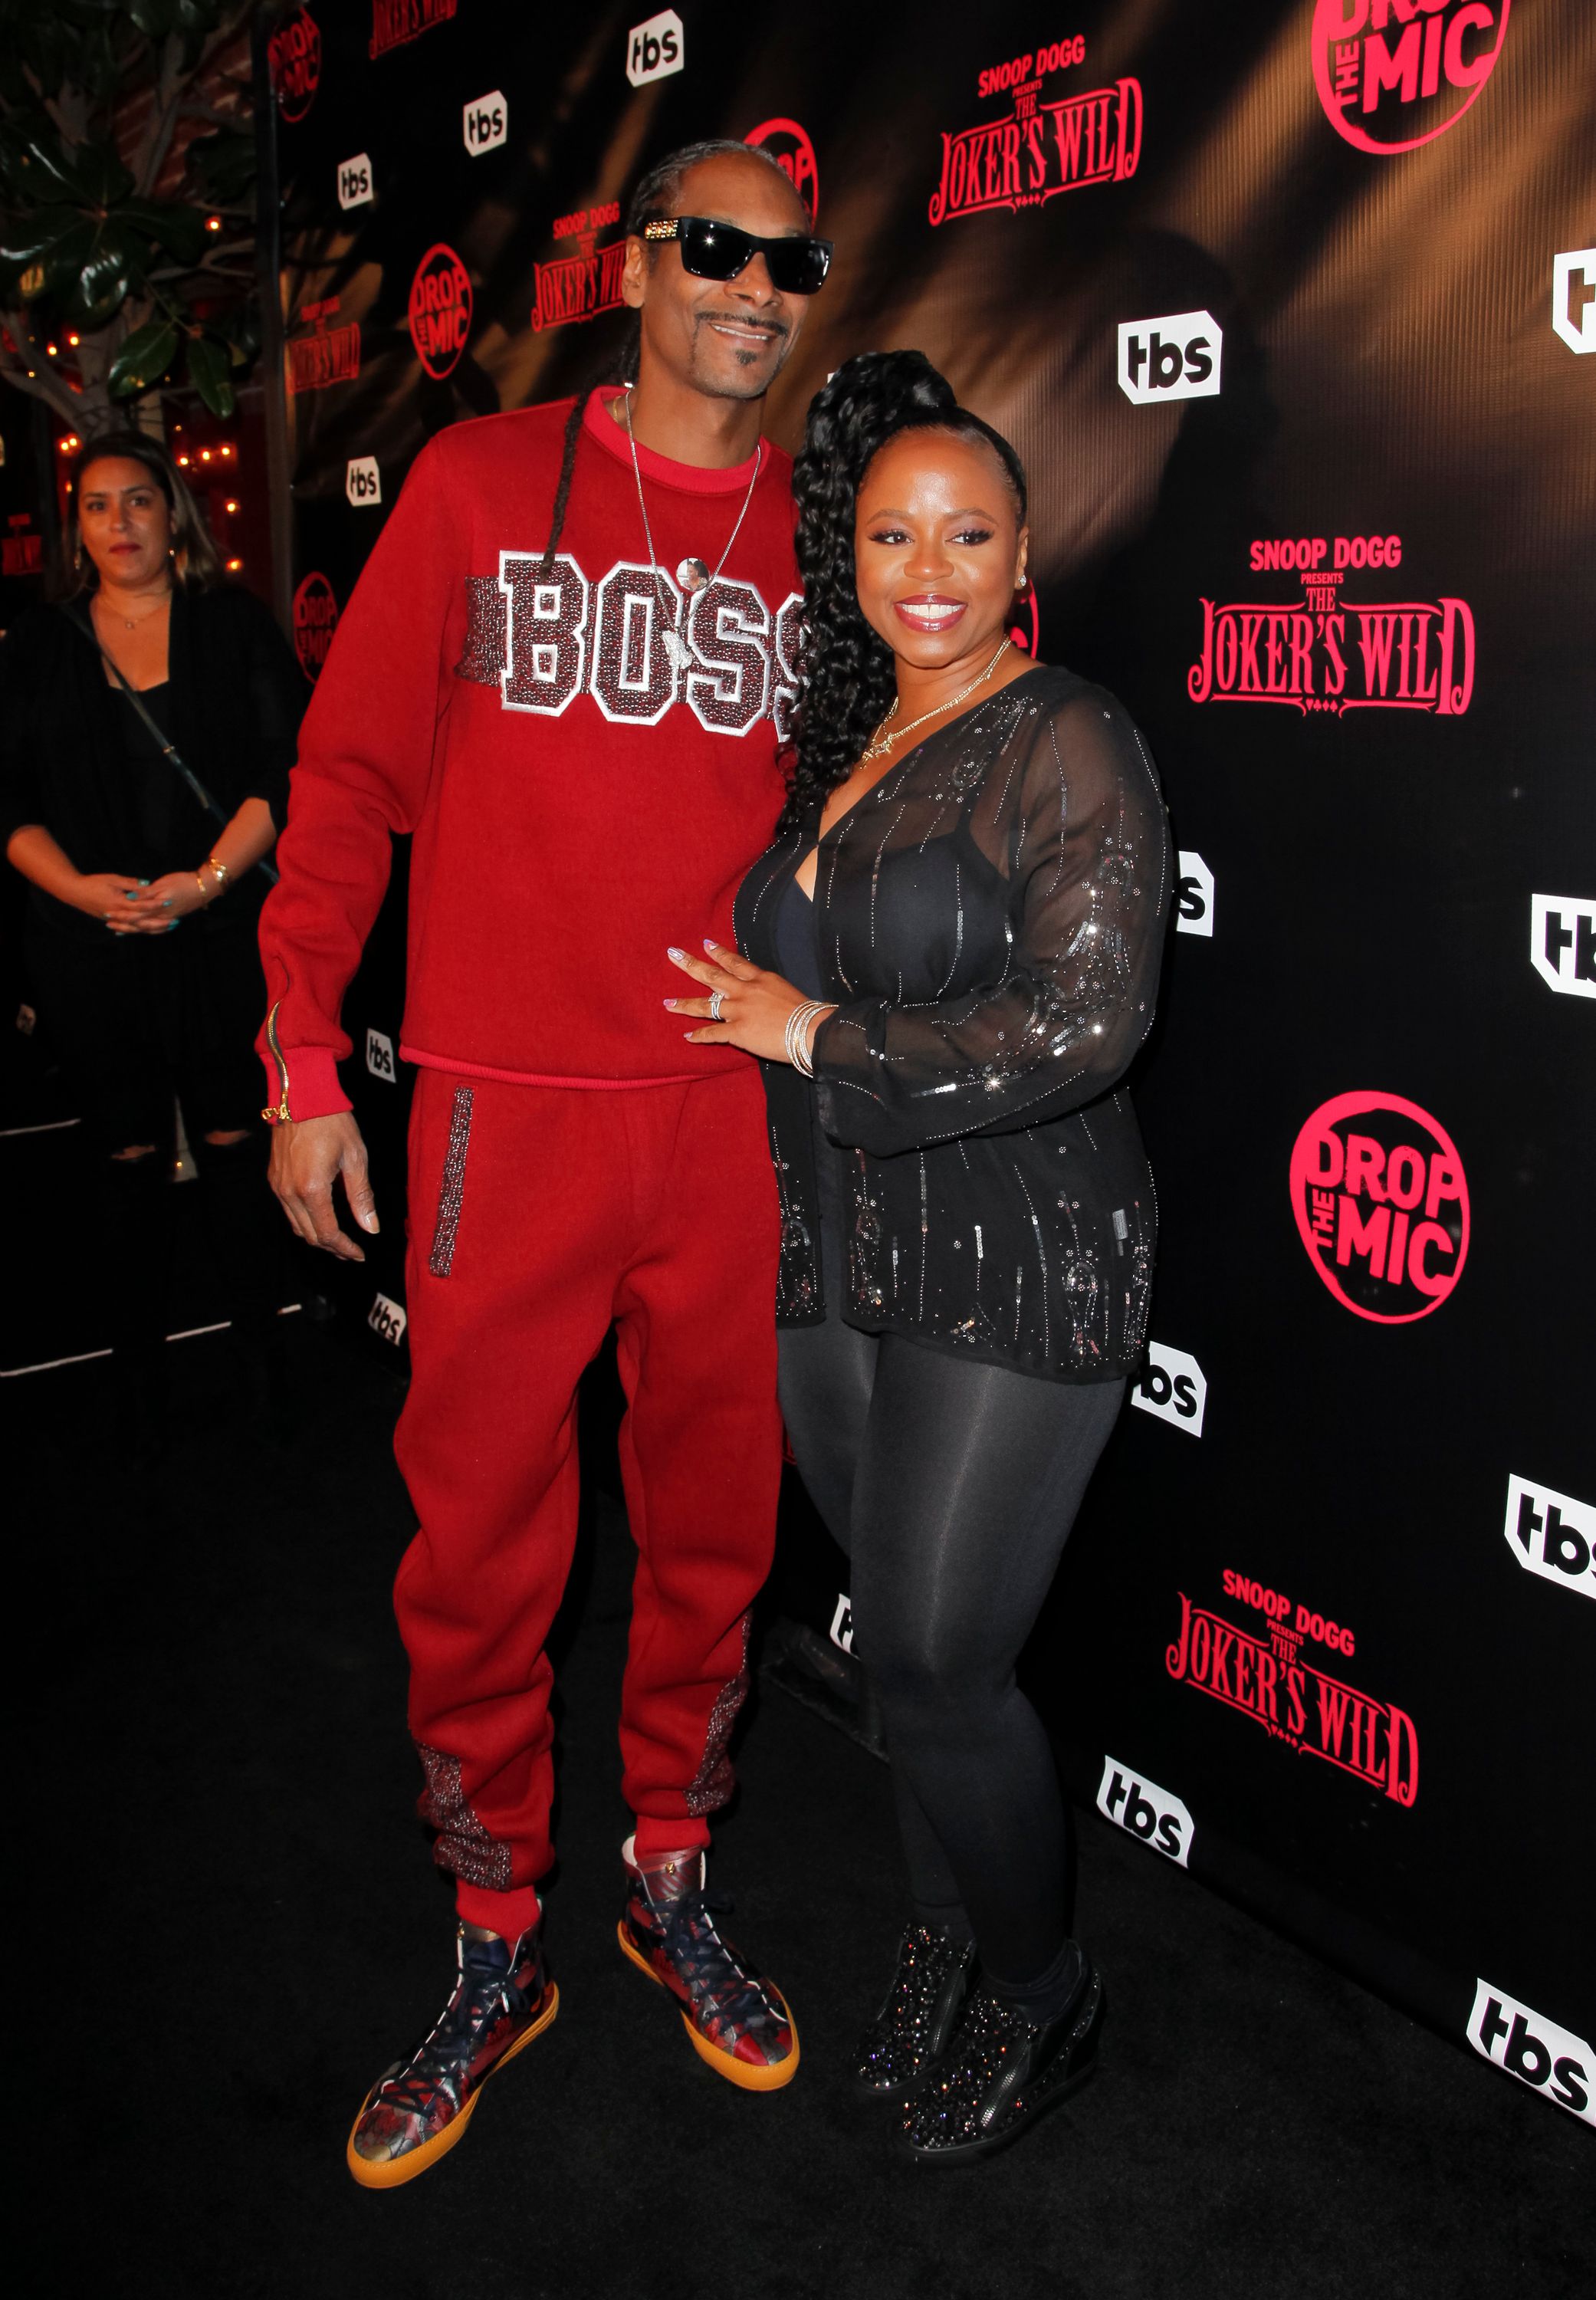 Snoop Dogg and Shante Broadus at the premiere for TBS's 'Drop The Mic' and 'The Joker's Wild' at The Highlight Room on October 11, 2017. | Source: Getty Images